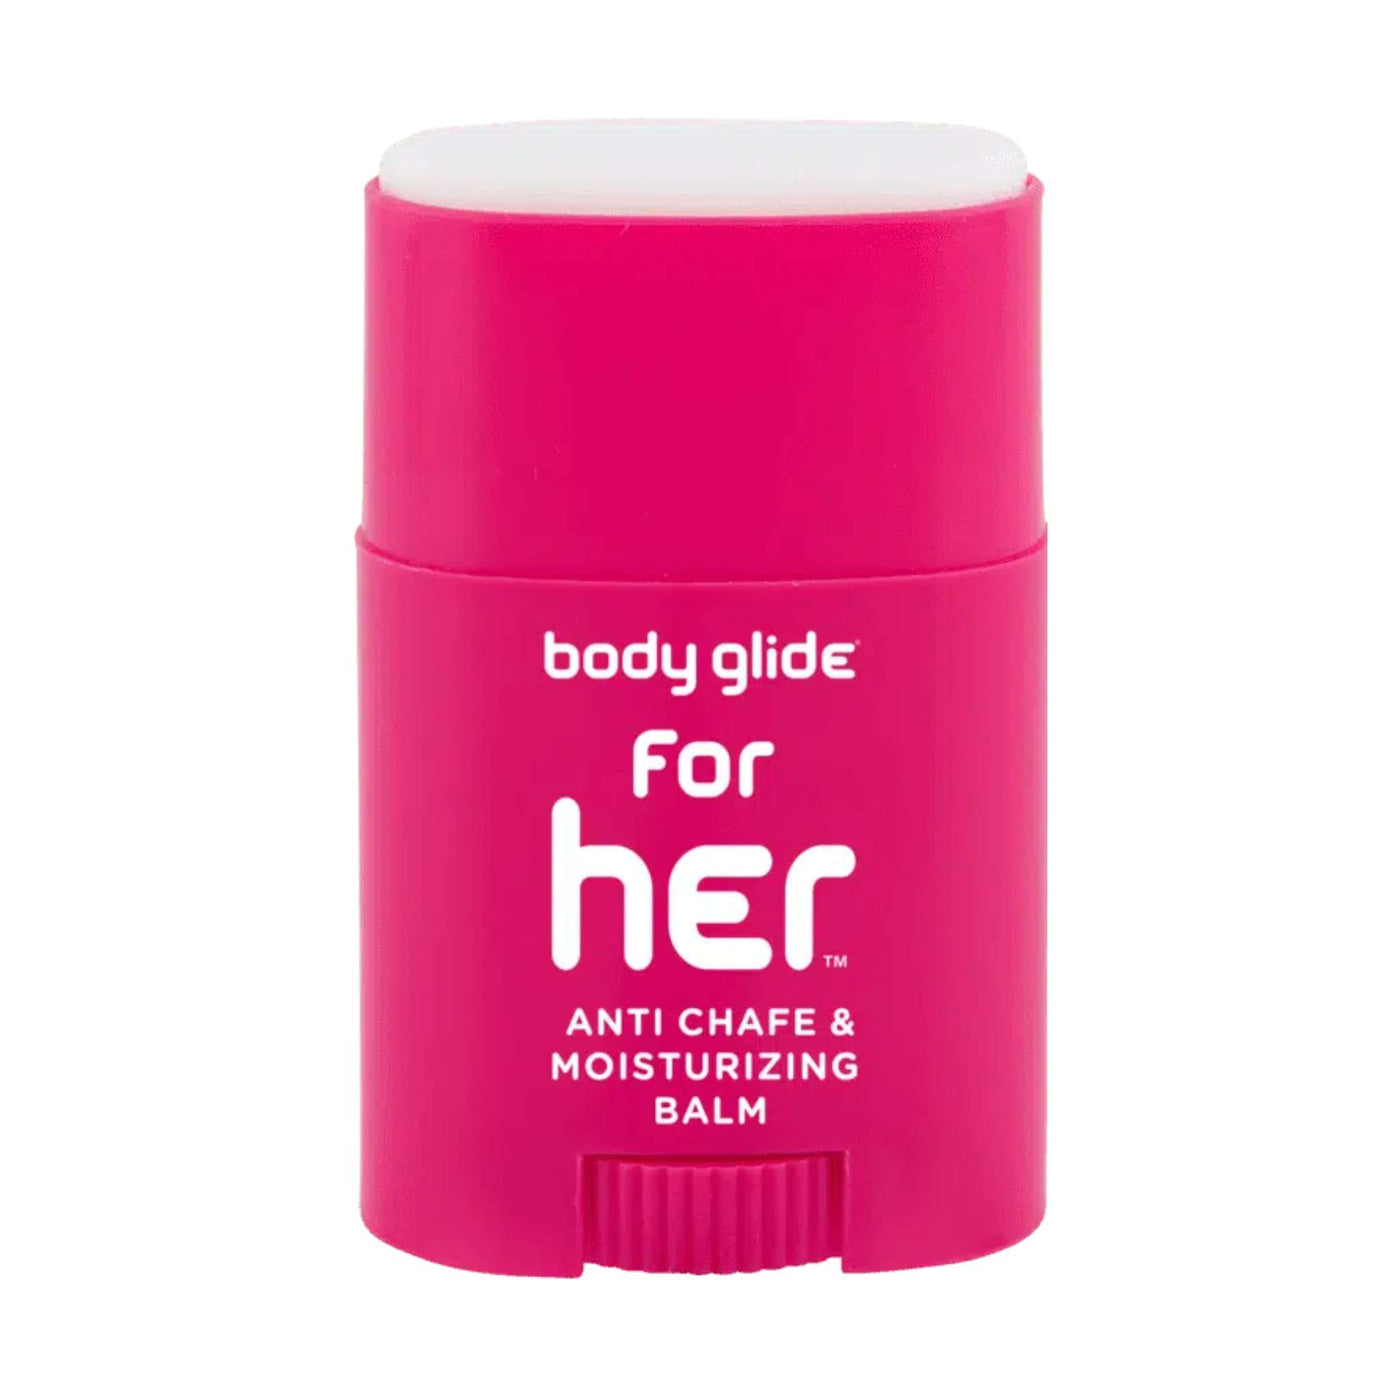 Body Glide For Her Balm - 22gm | Anti Chafing Balm | Further Faster Christchurch NZ